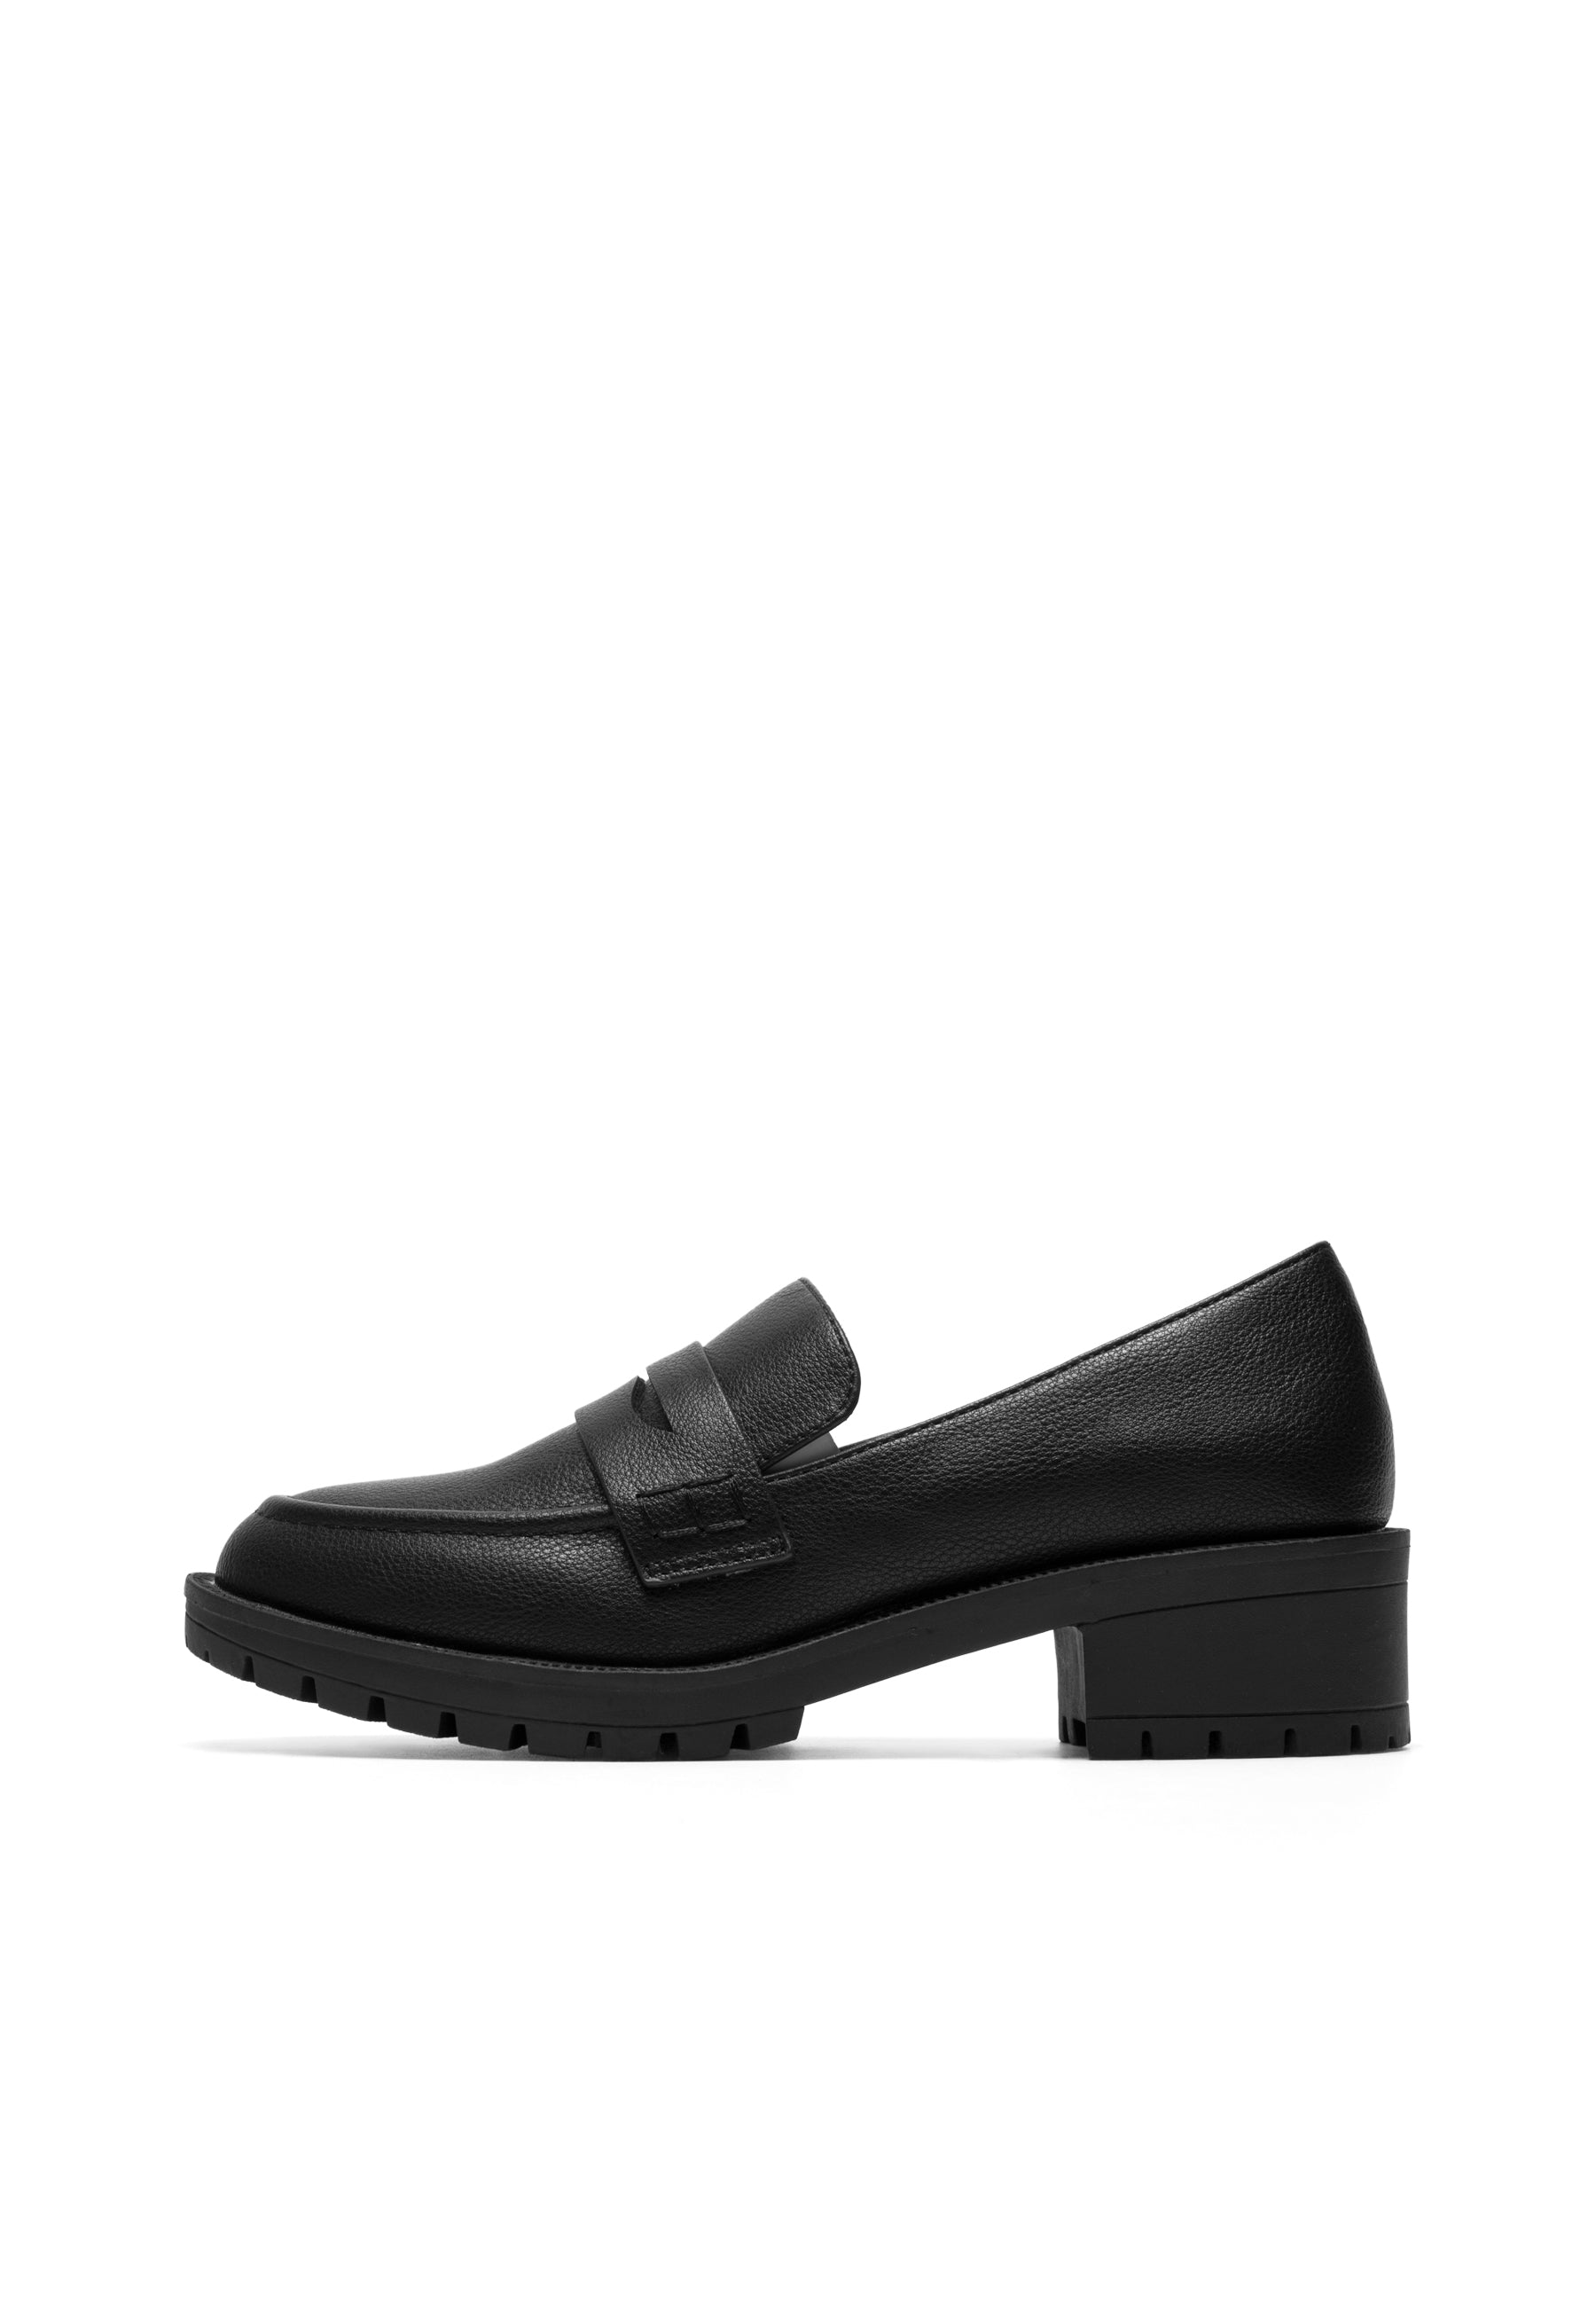 Bianco BIAPEARL Simple Penny Loafer Carnation Penny Loafer Black